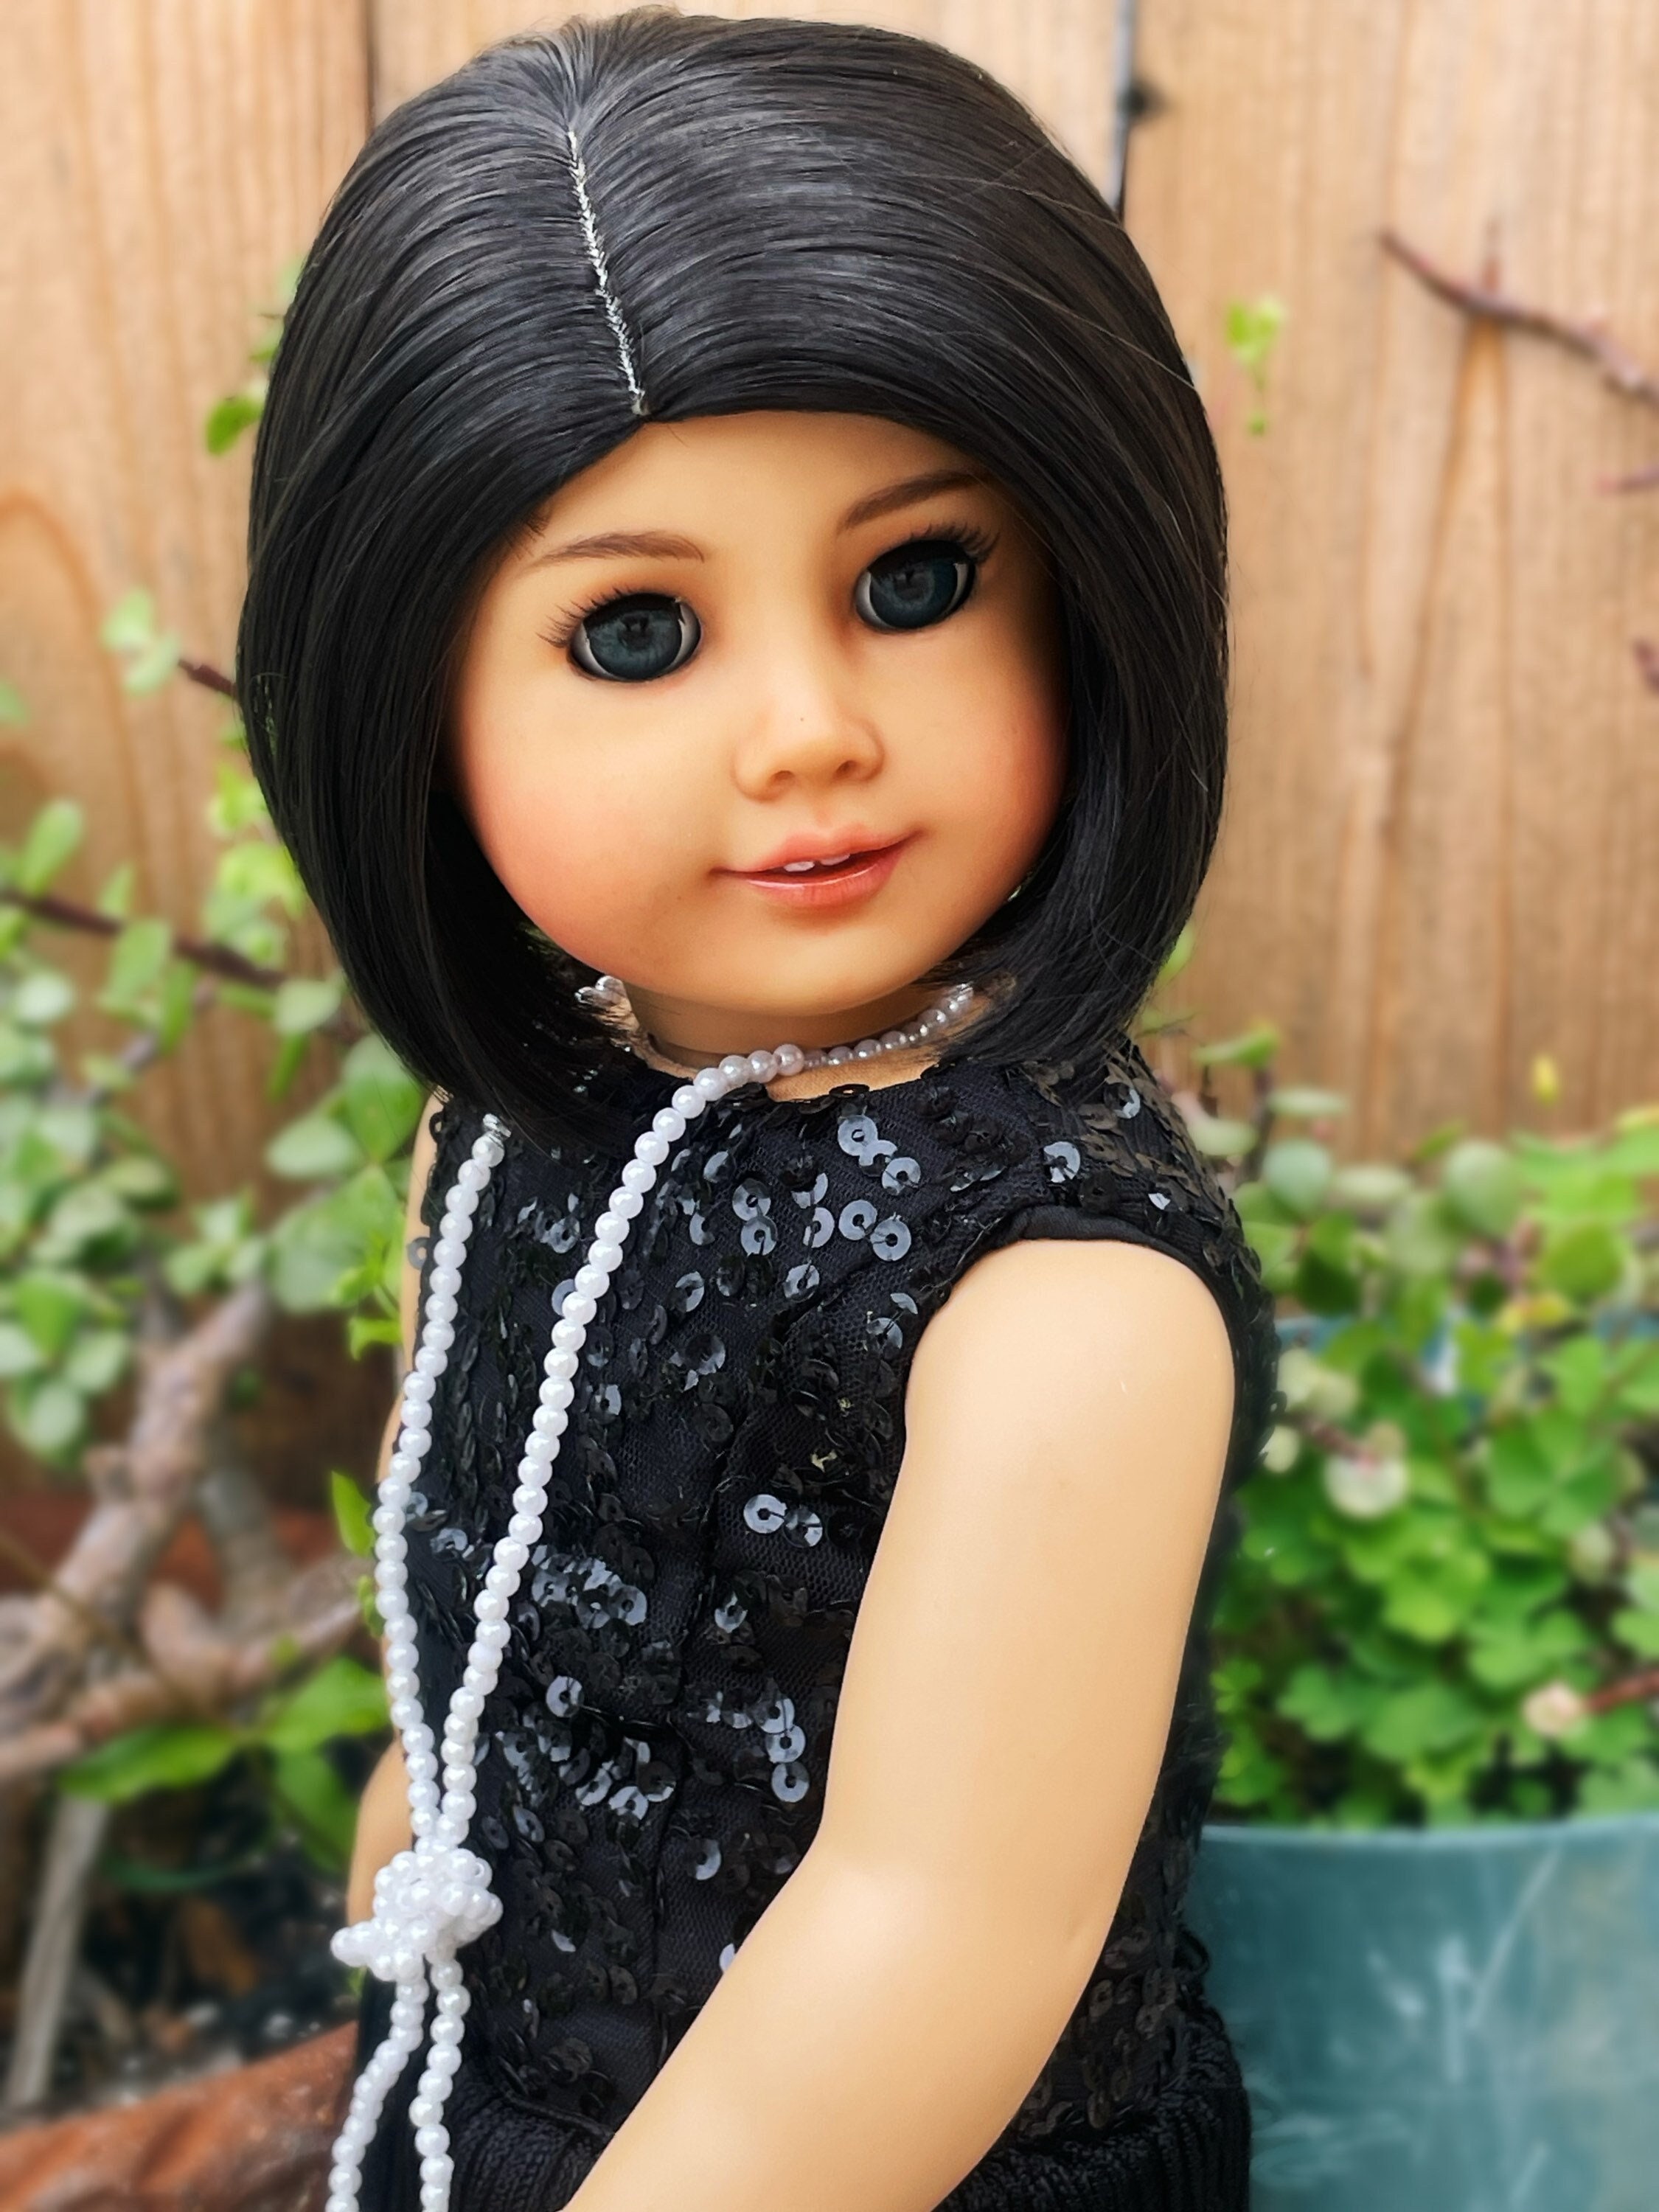 Doll Wigs : Dollspart Supply - Doll parts, supplies, shoes, high